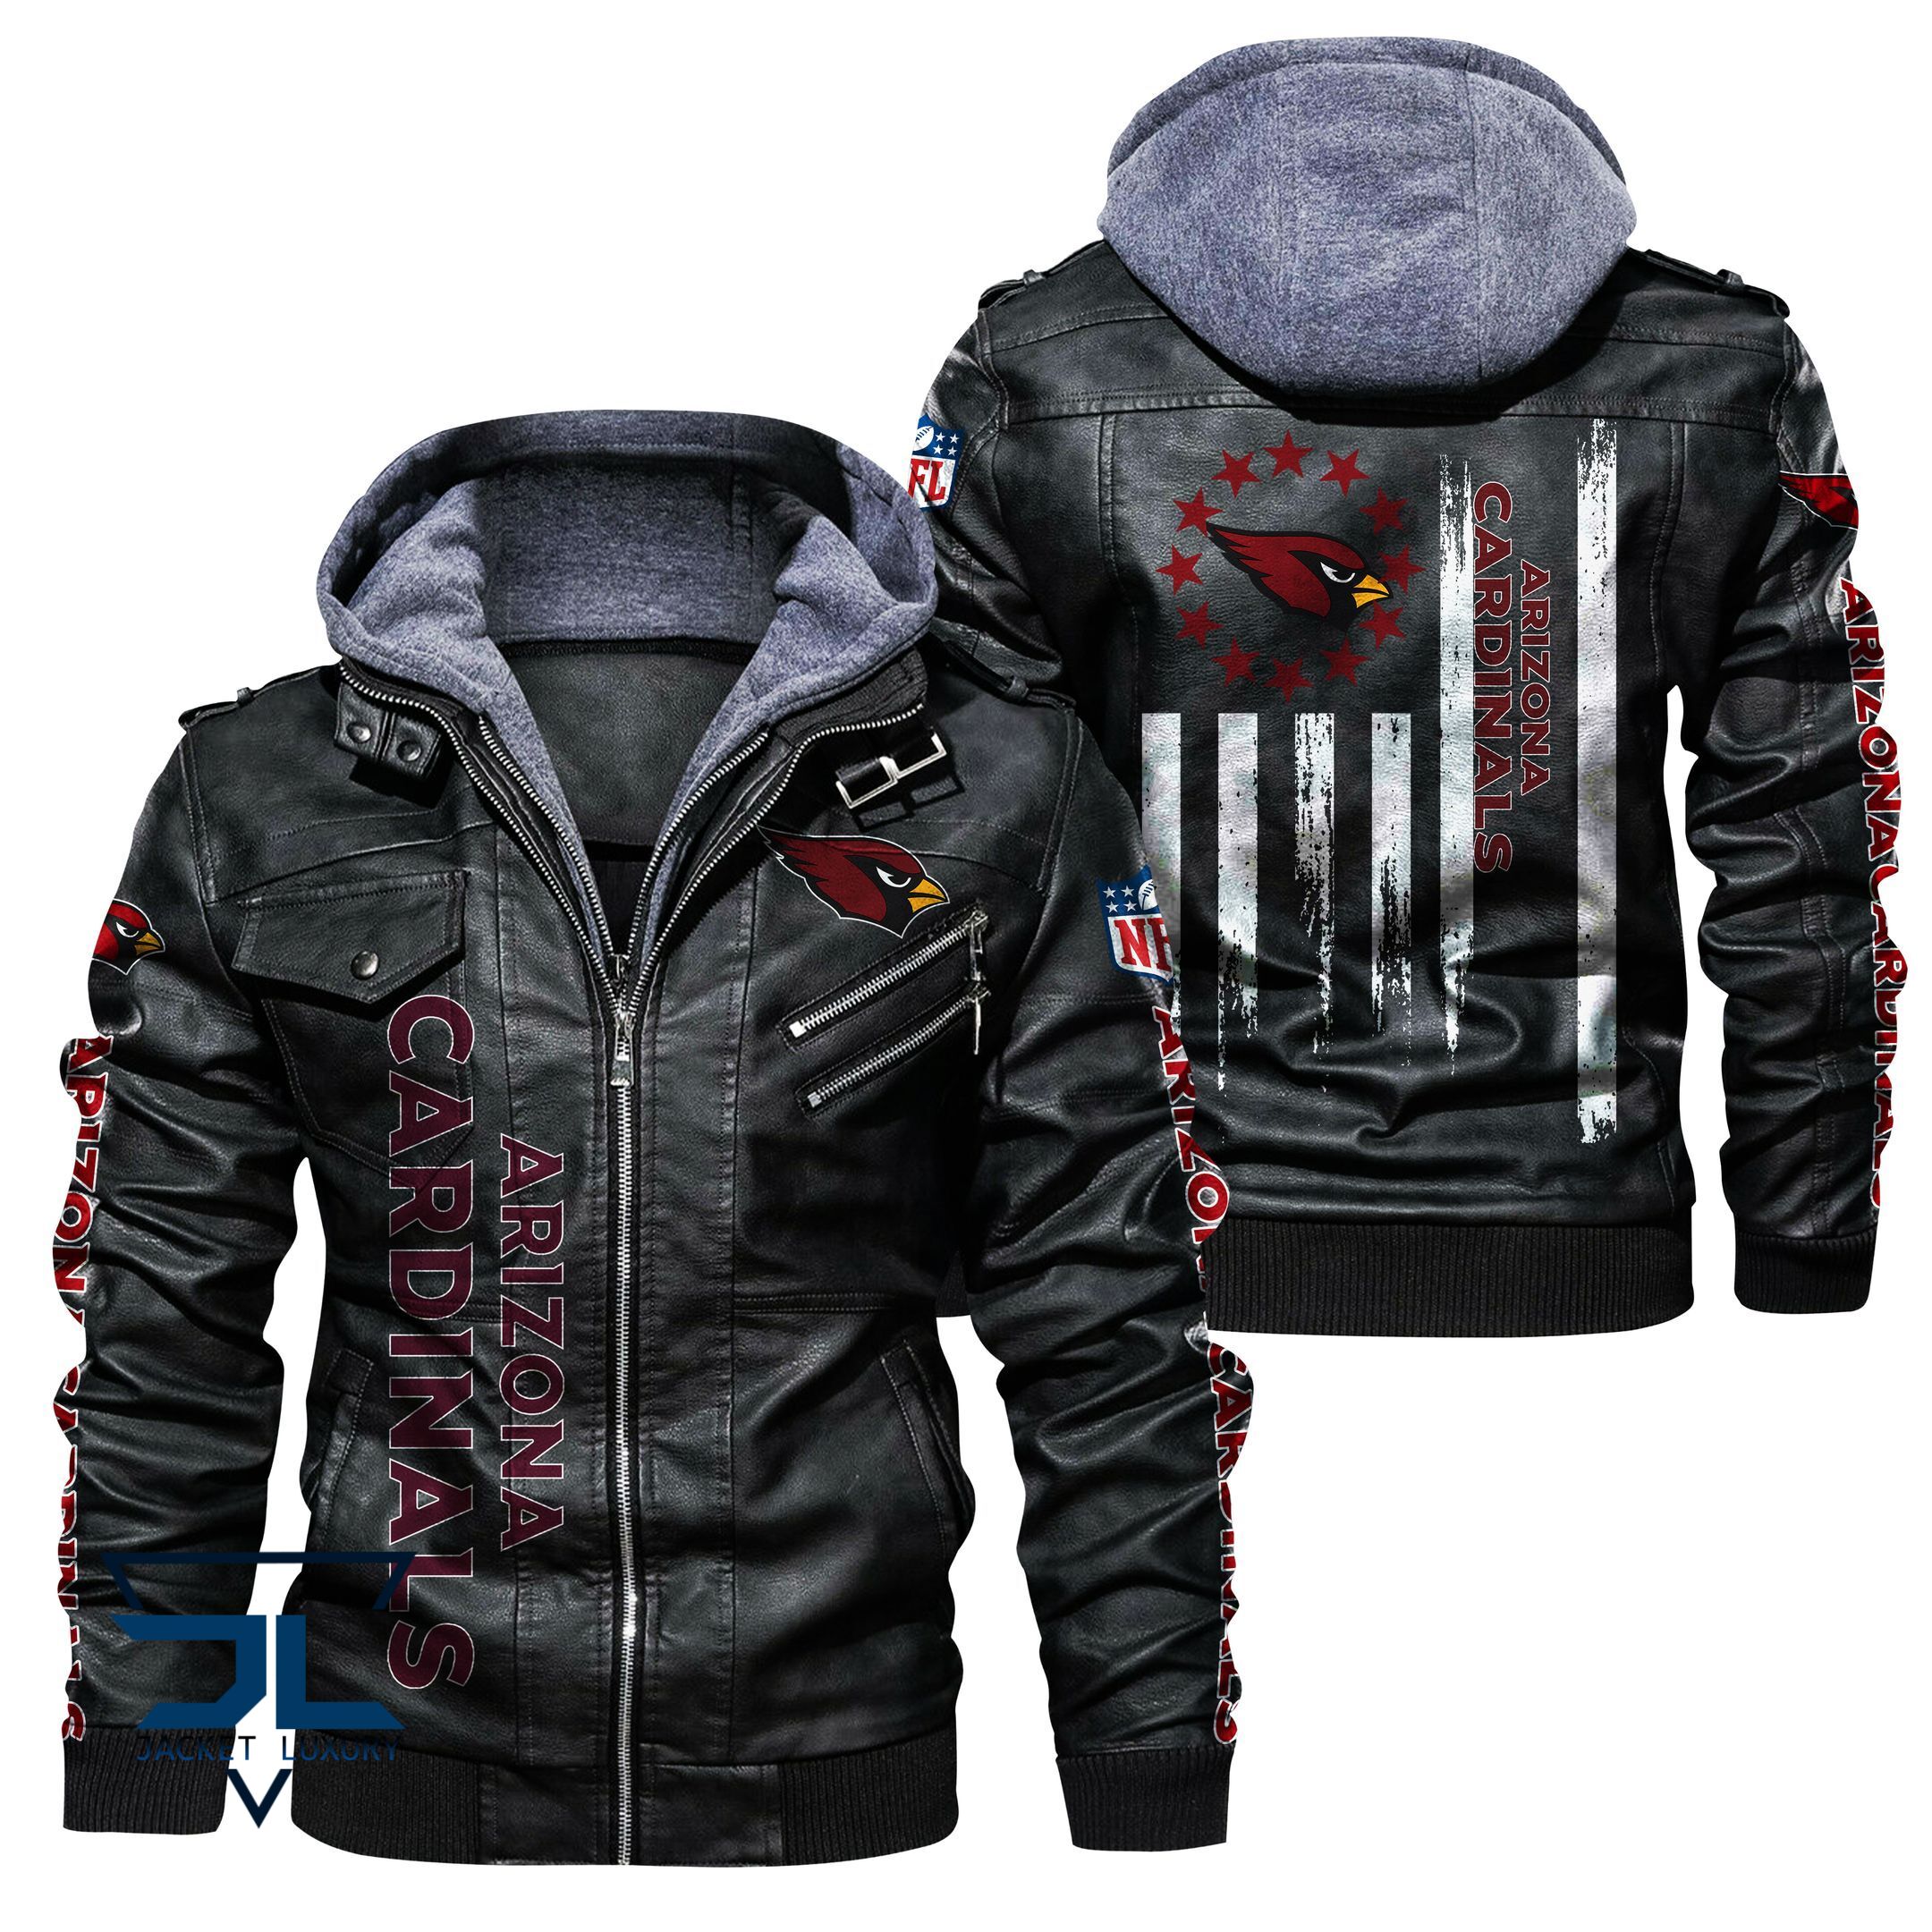 Top jacket is very affordable and free shipping 3